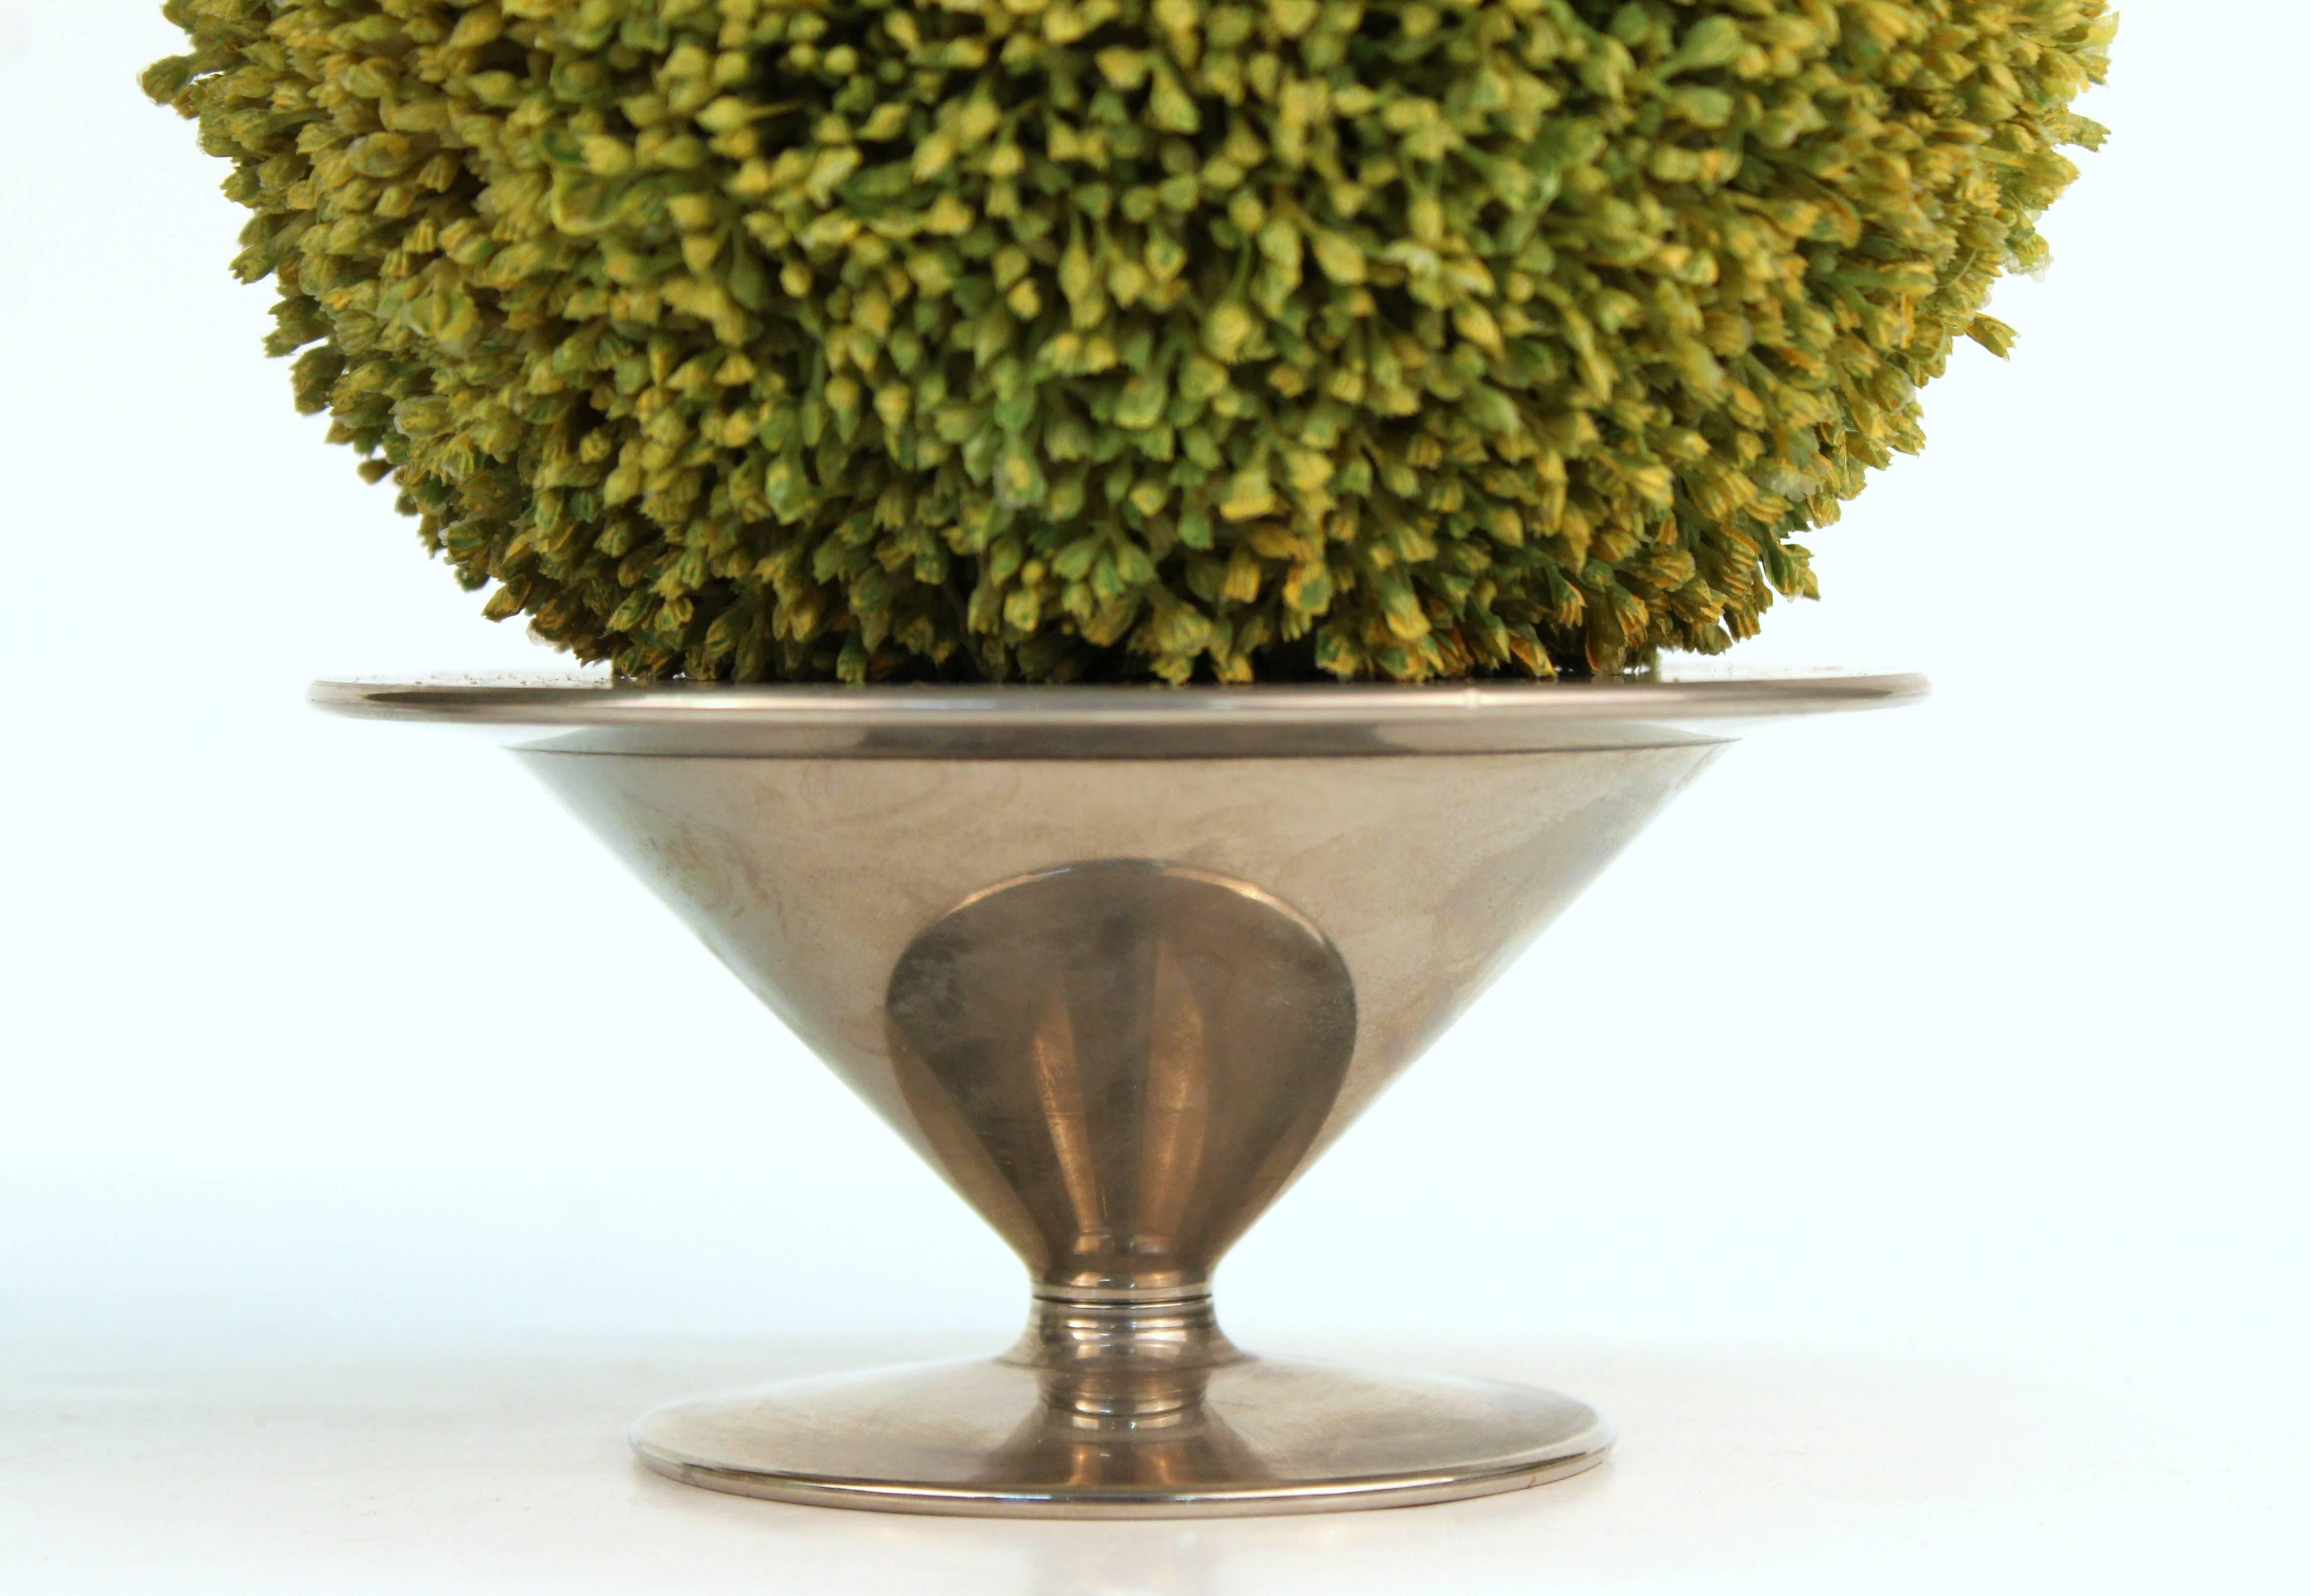 Each of these decorative votive holders feature a small faux topiary shrub in spherical form. The candleholders are in a silver-toned metal, neoclassical Revival form, and are stamped 'Saint Hilare' underneath. The shrubs are not attached to the